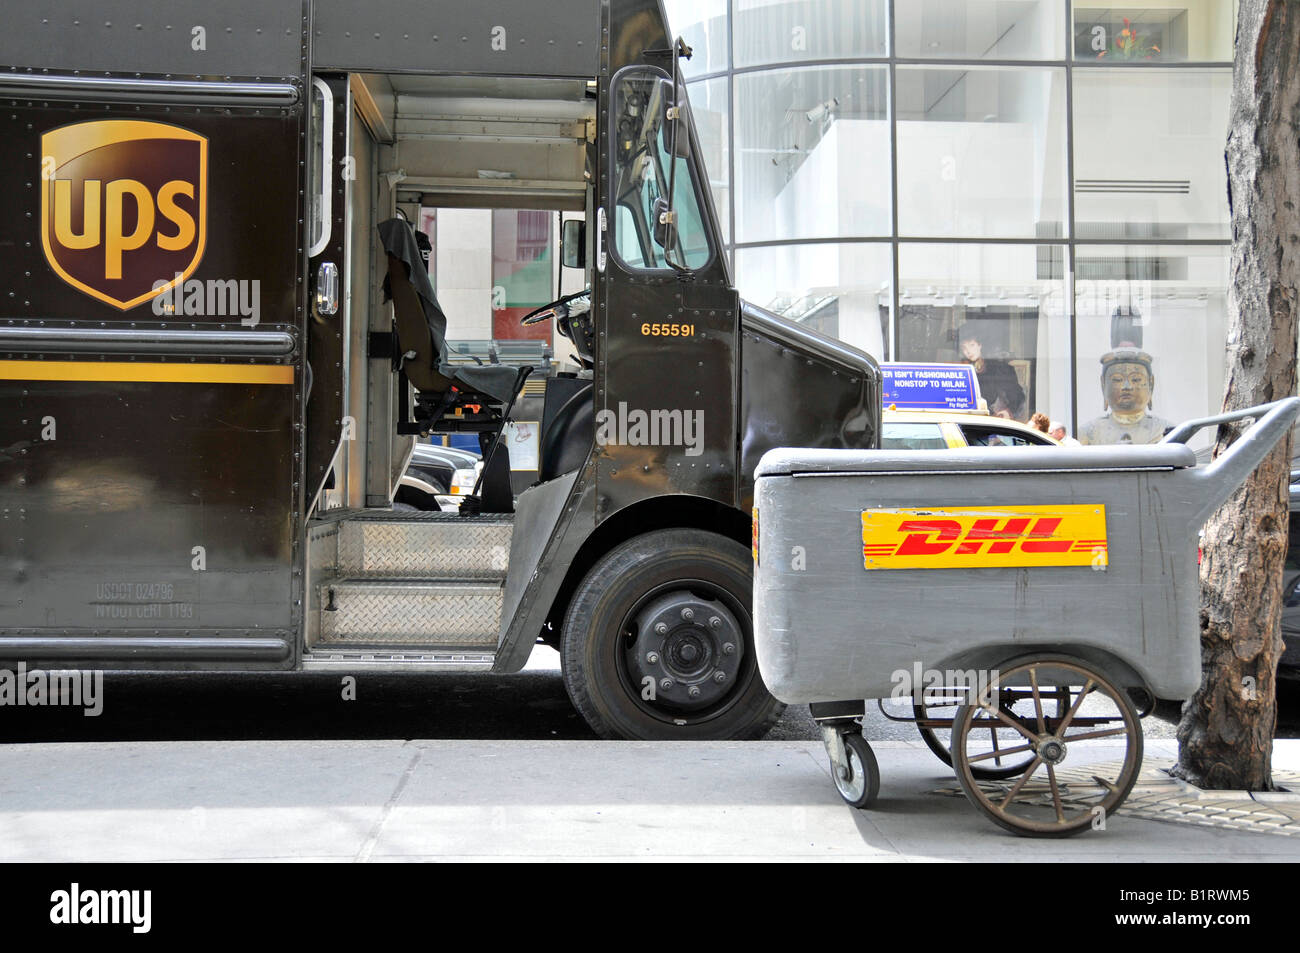 UPS delivery van next to a DHL delivery cart, Manhattan, New York City, USA Stock Photo